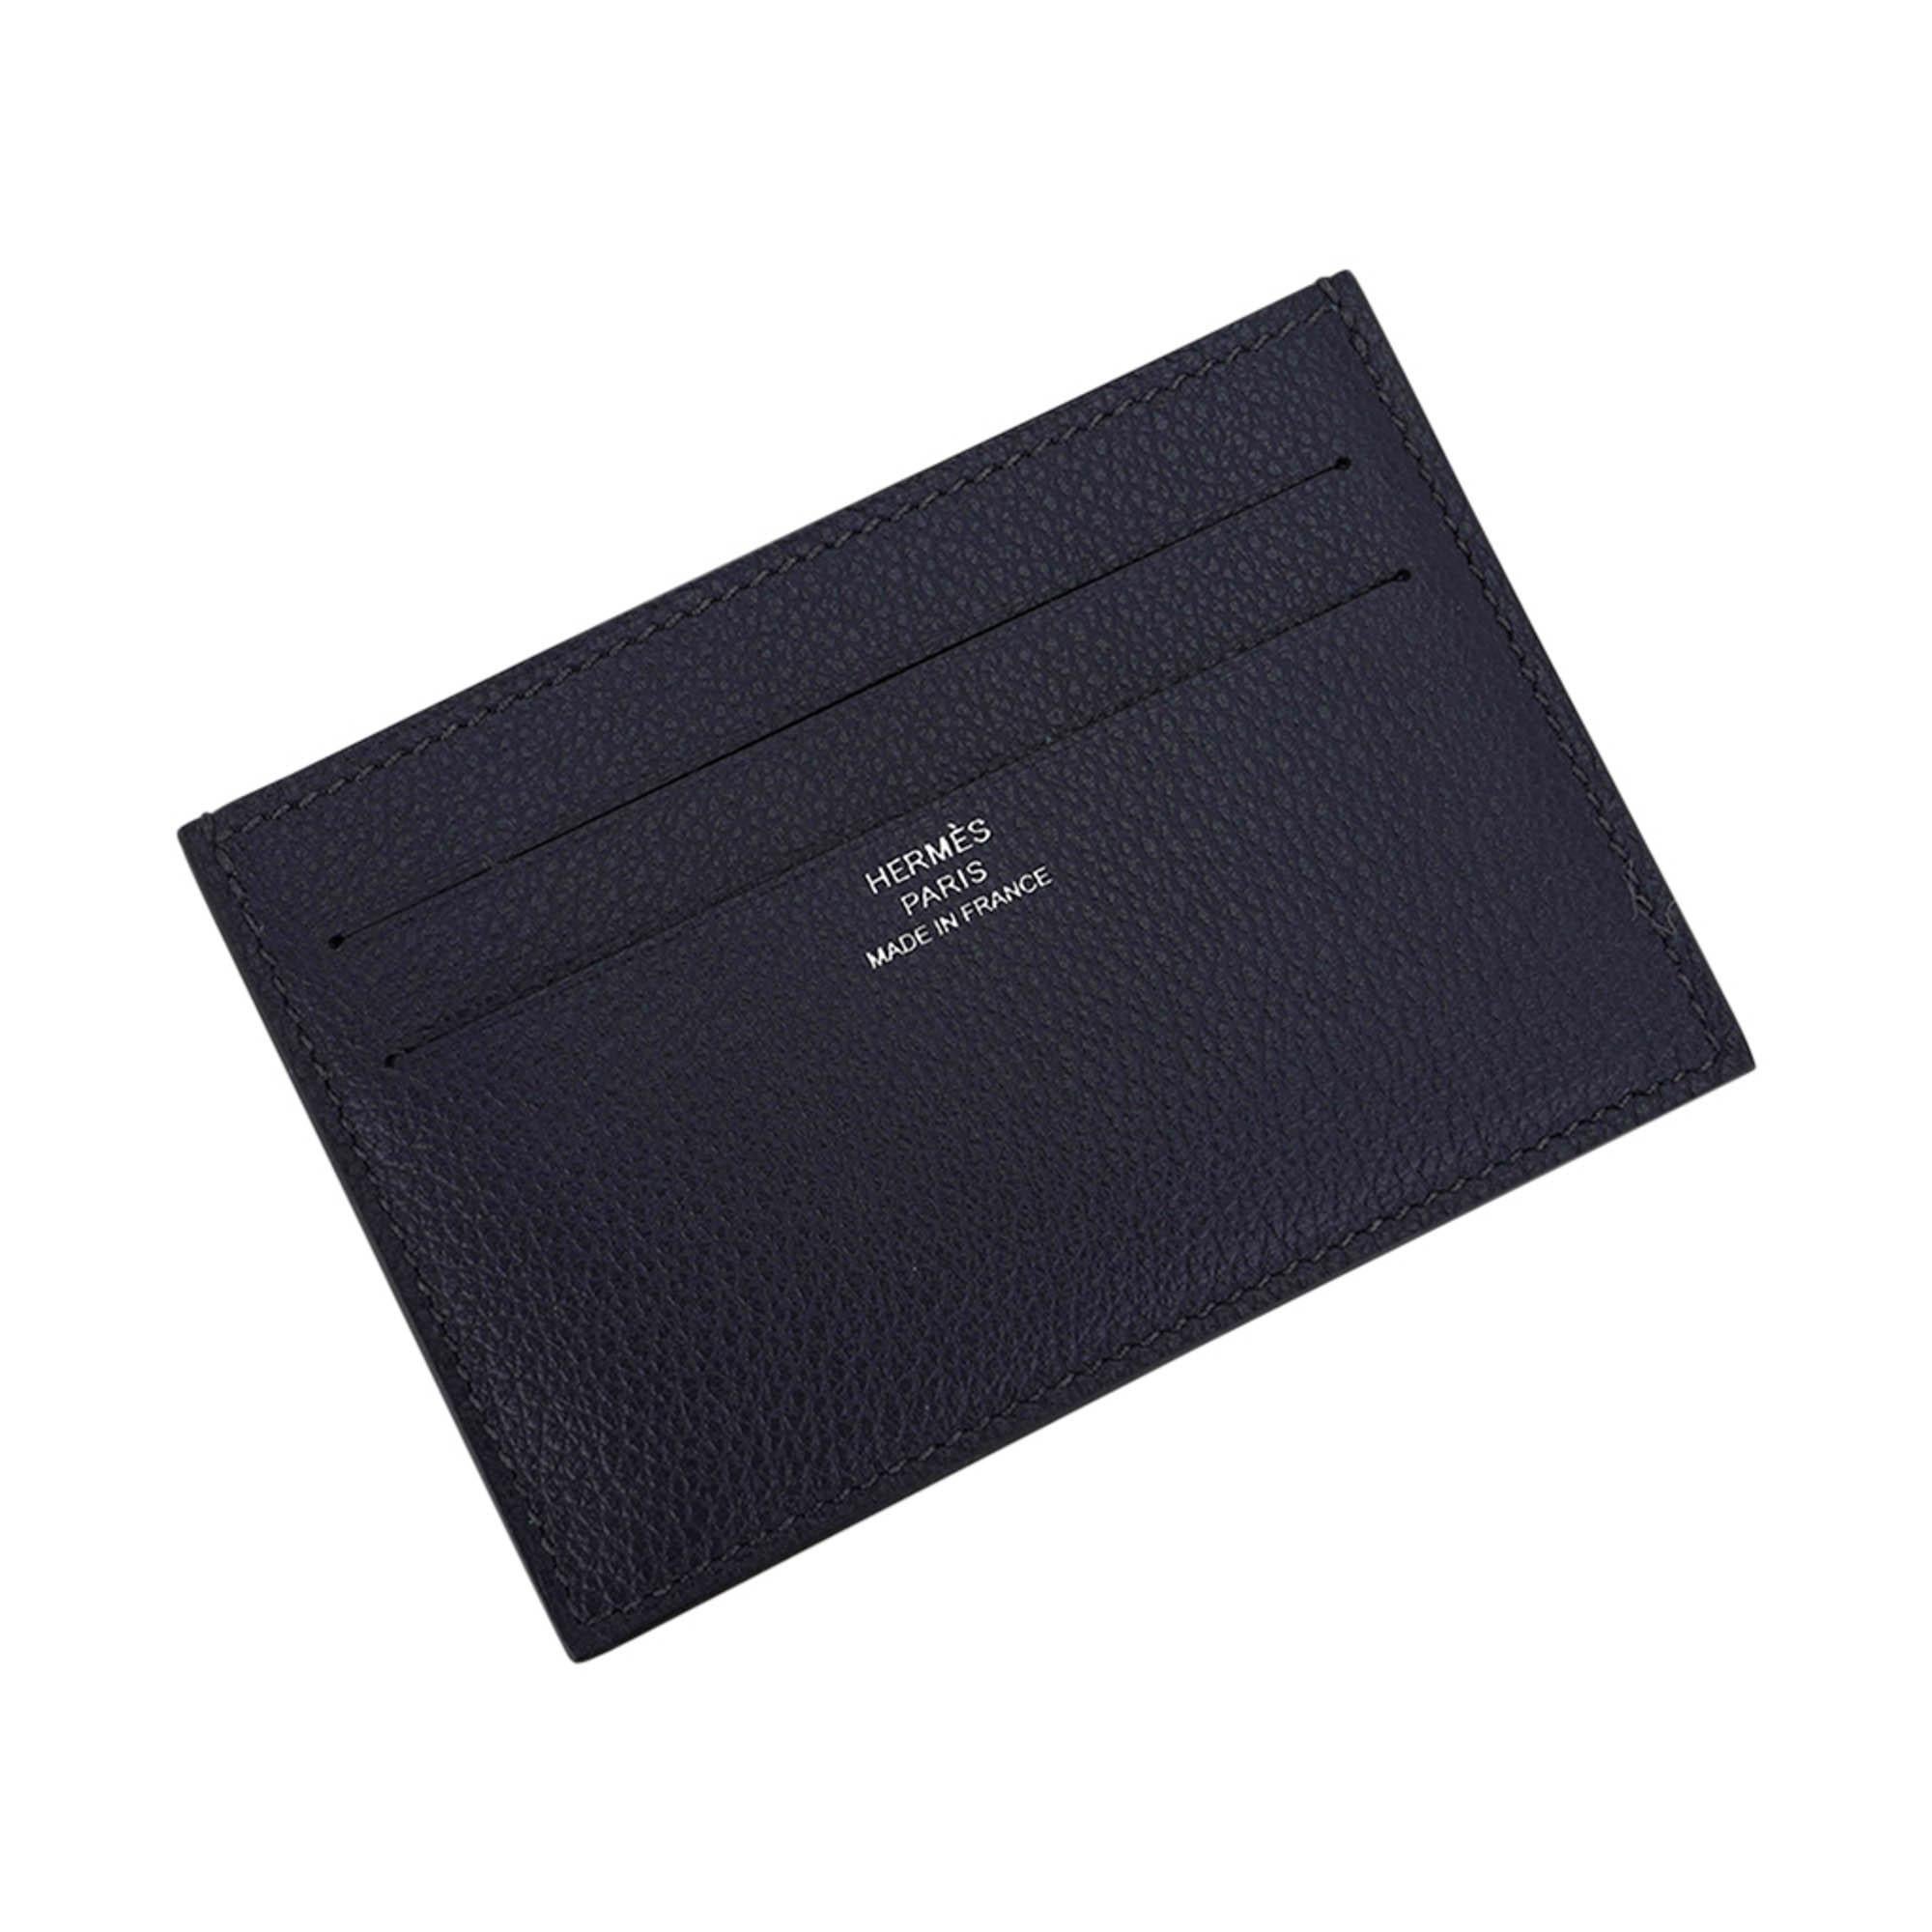 Mightychic offers an Hermes Citizen Twill Card Holder featured in Blue Nuit.
Interior printed silk lining is in Blues and Green.
The card holder has 2 slots for business and or credit cards in front and 2 rear slots.
A center opening could